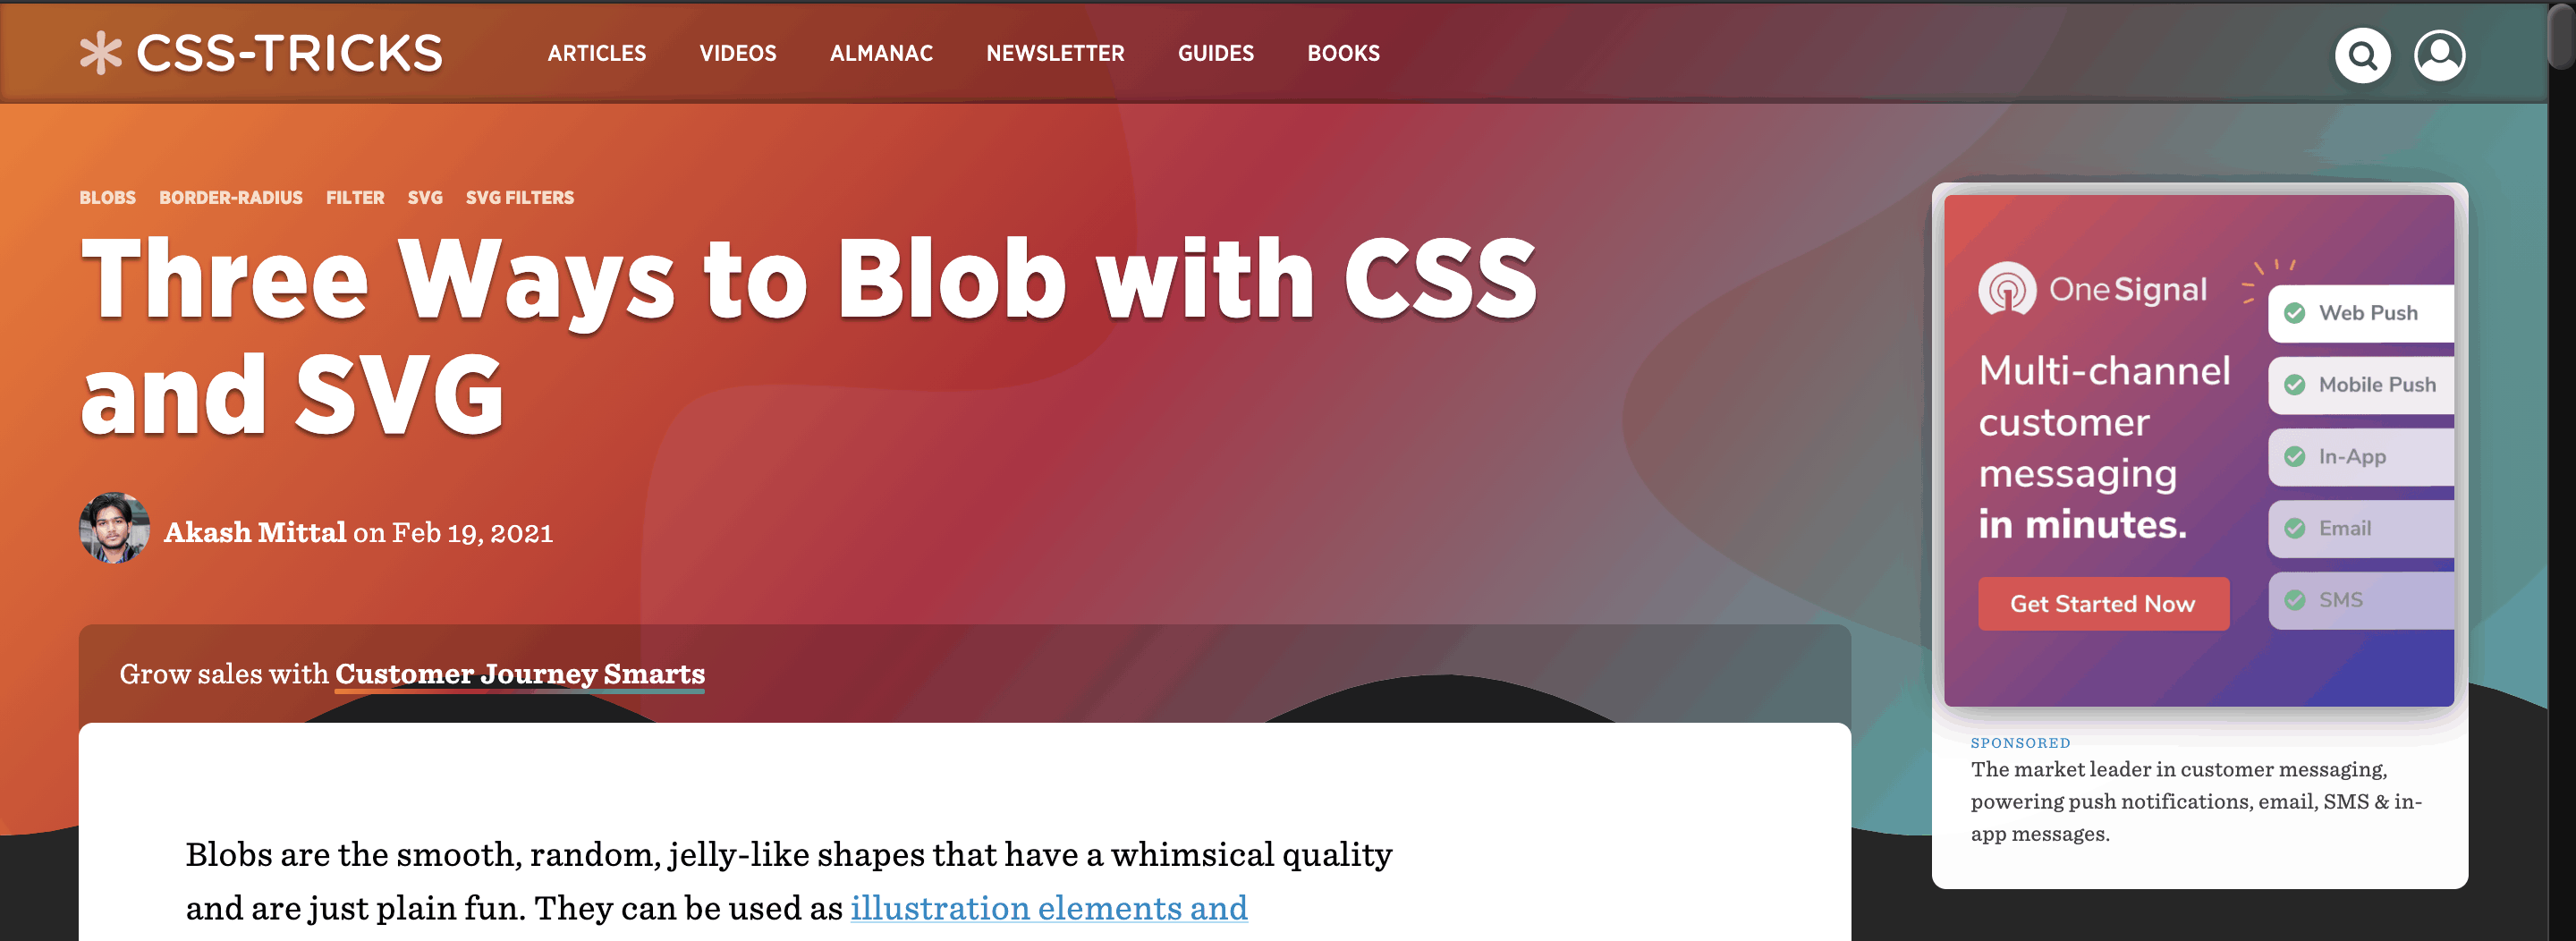 Three Ways to Blob with CSS and SVG